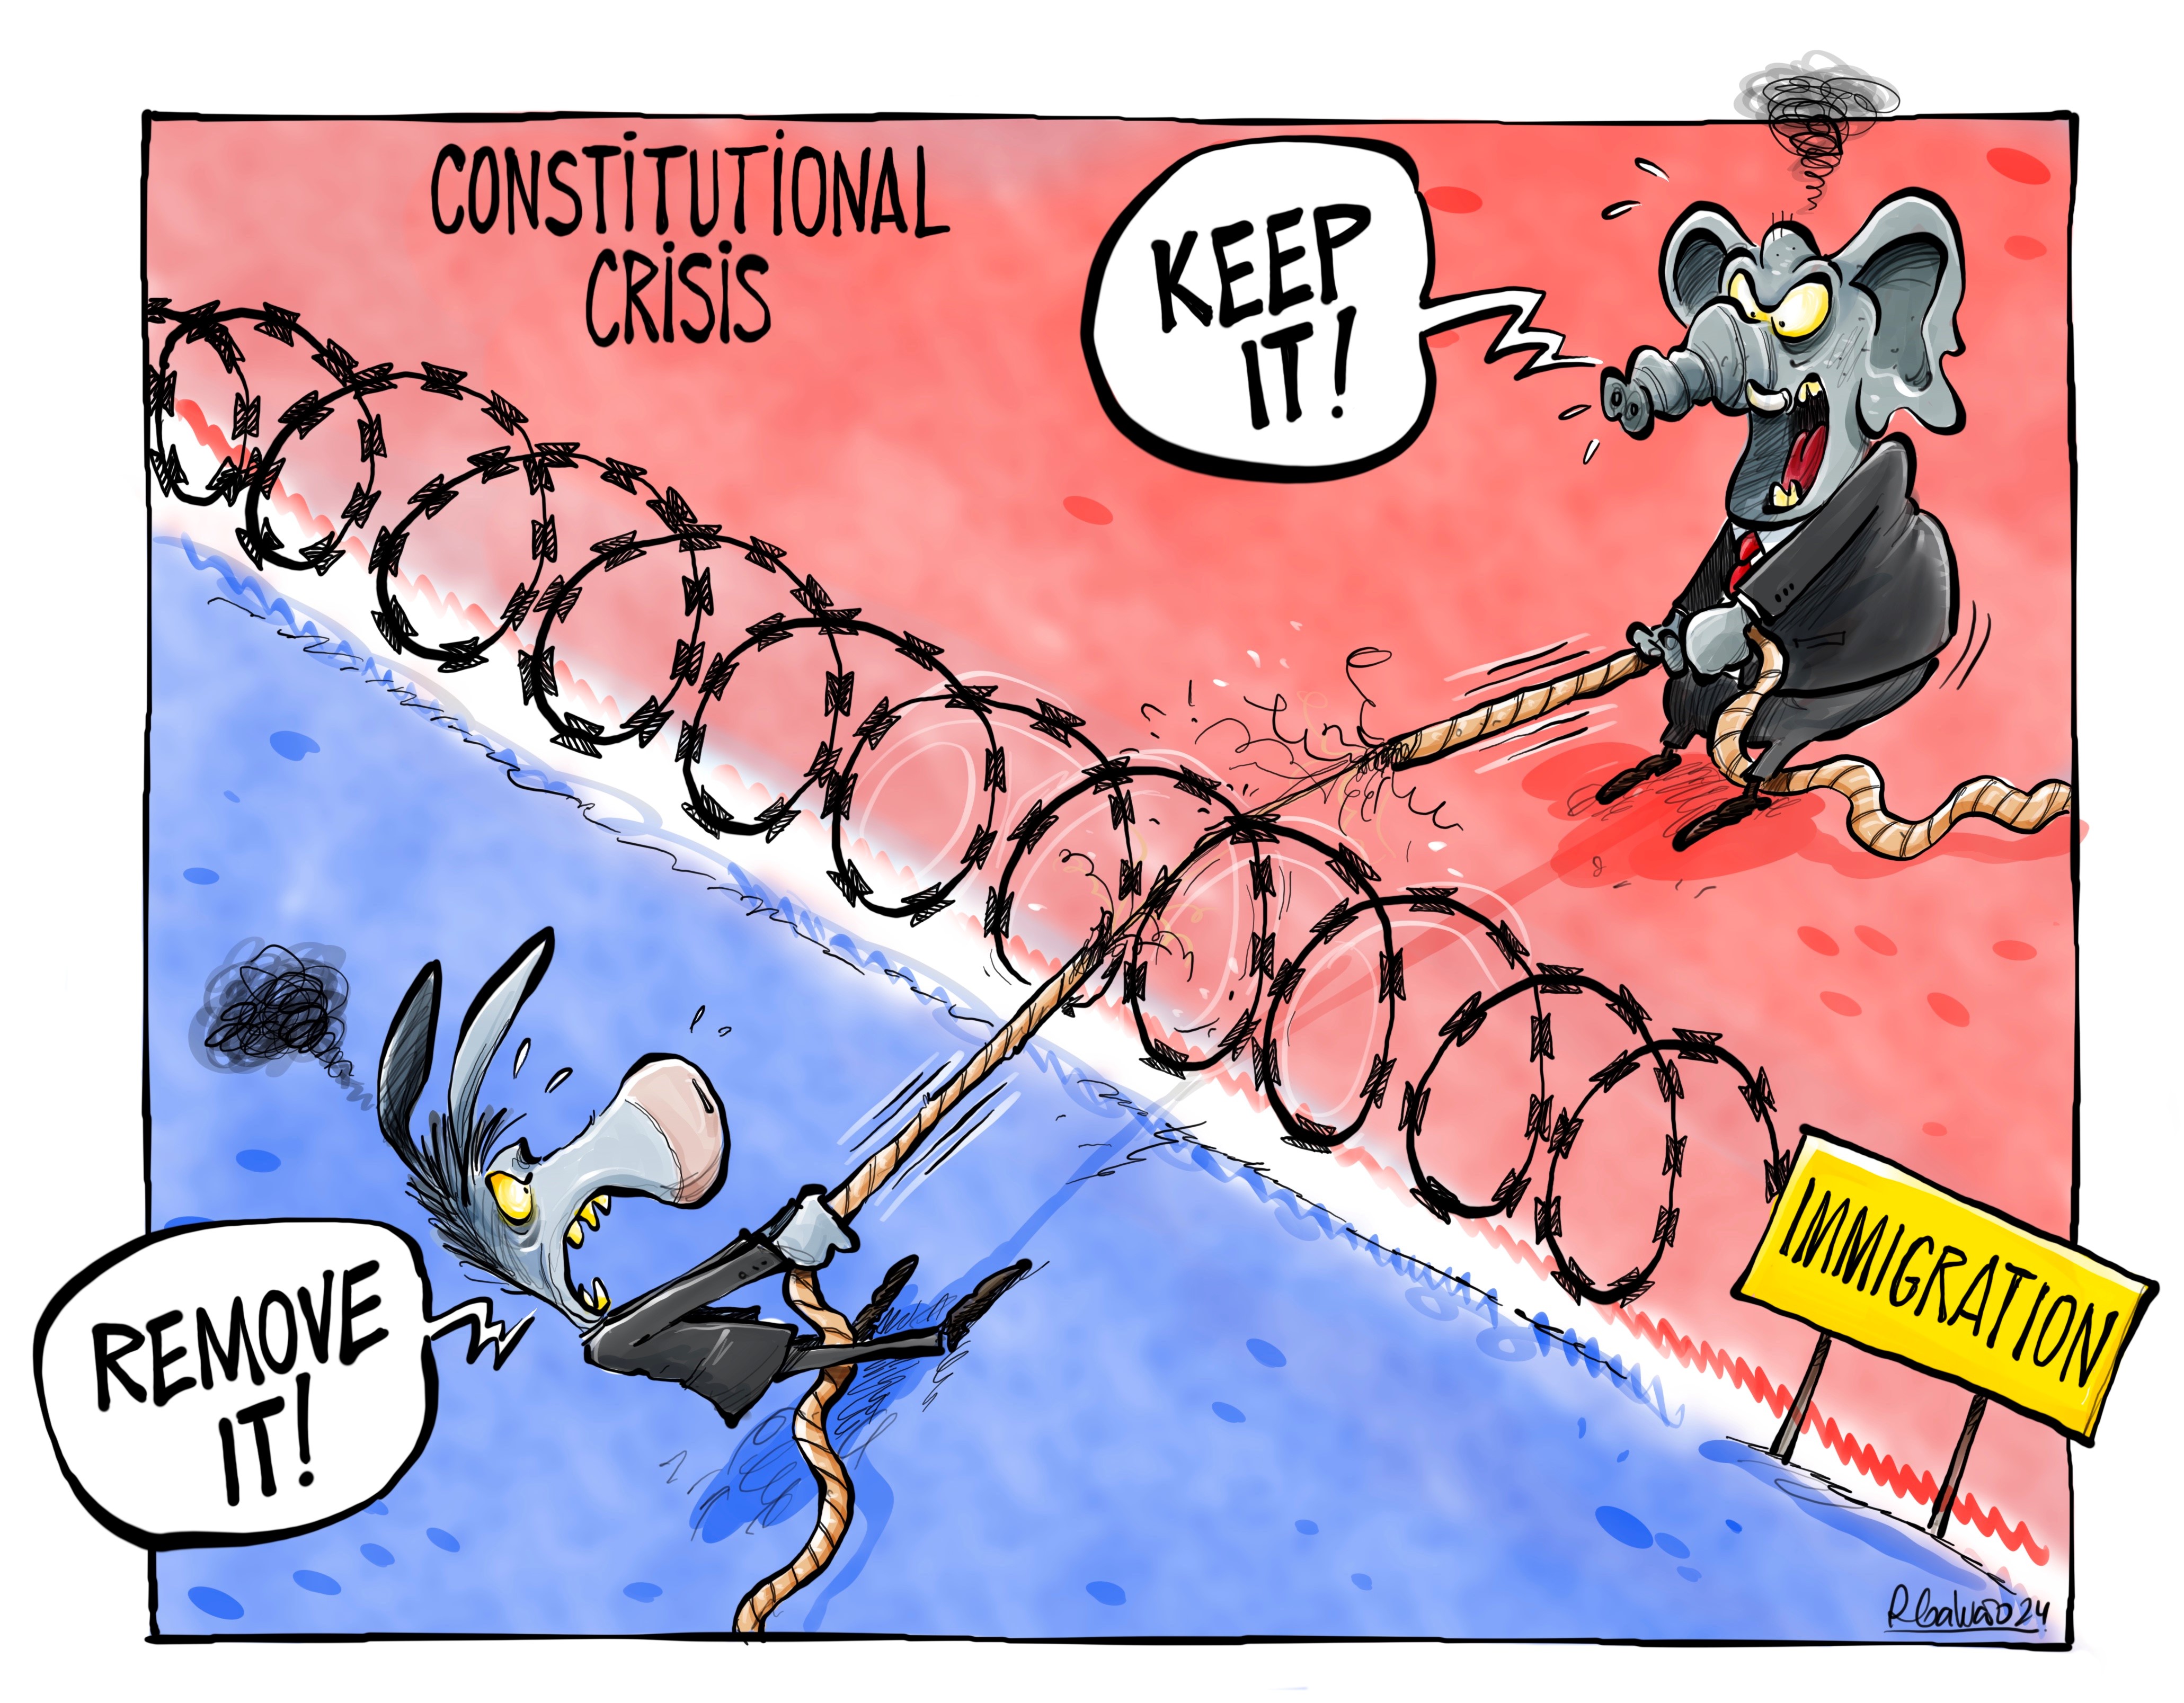 Immigration: An everlasting tug of war between red and blue